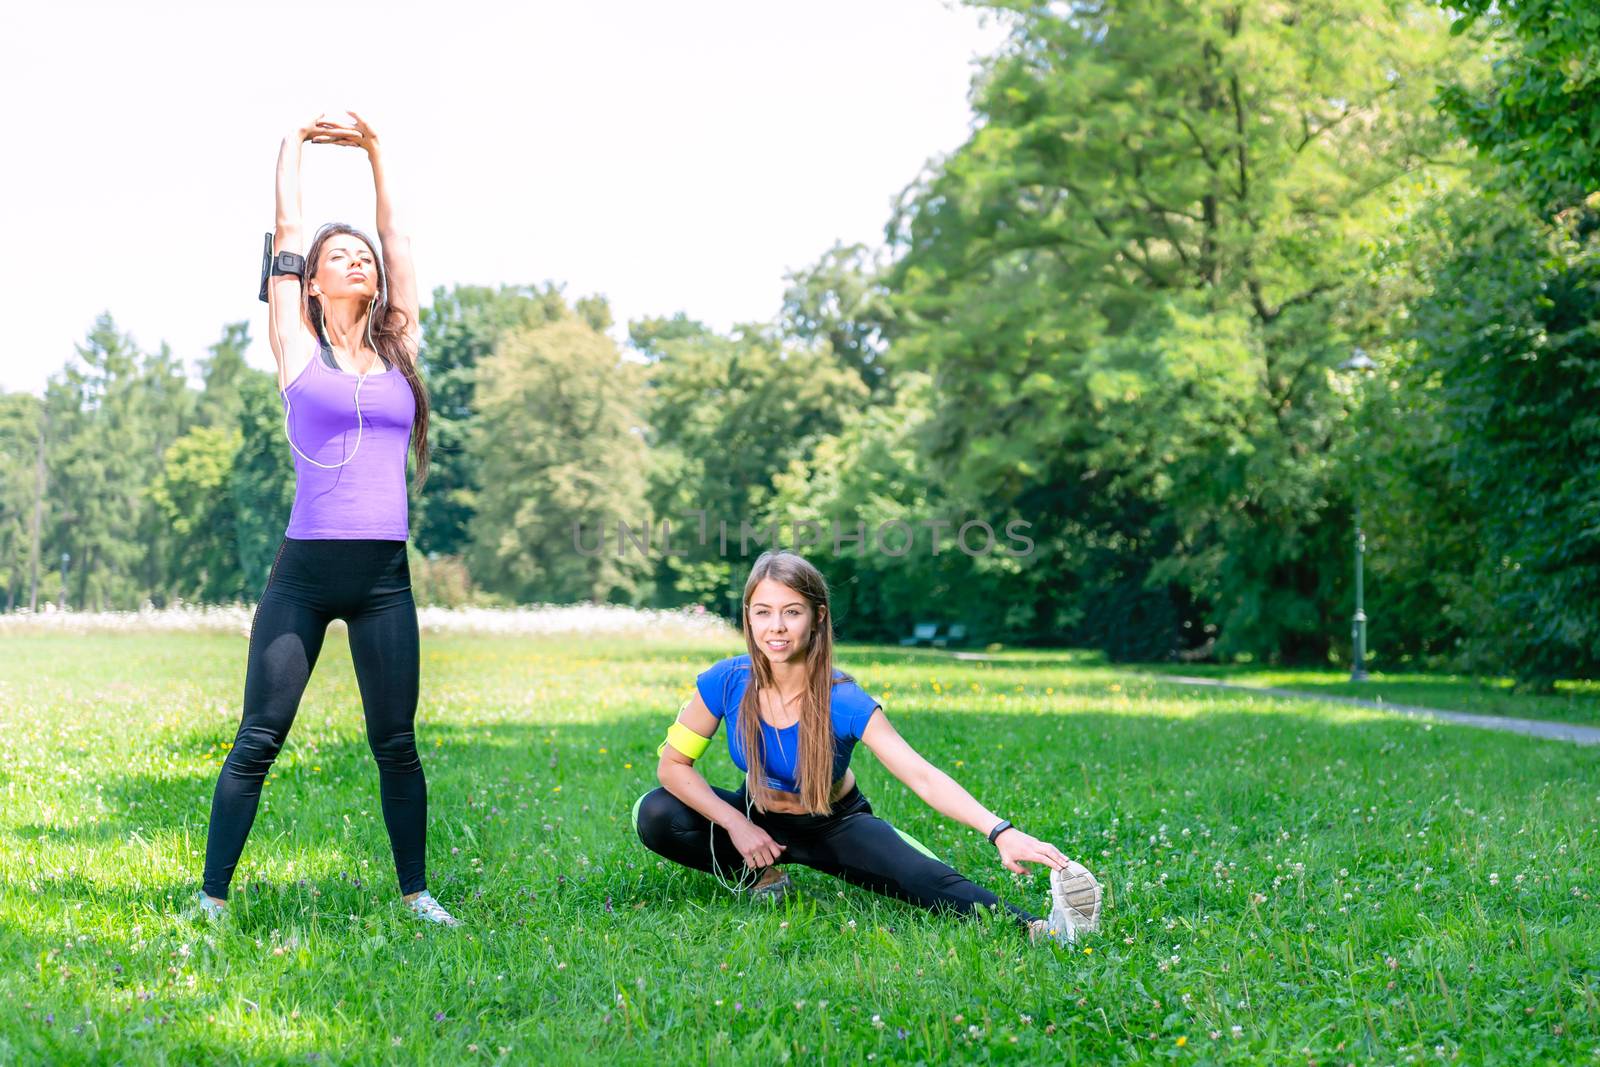 Fitness  activity outdoors by wdnet_studio